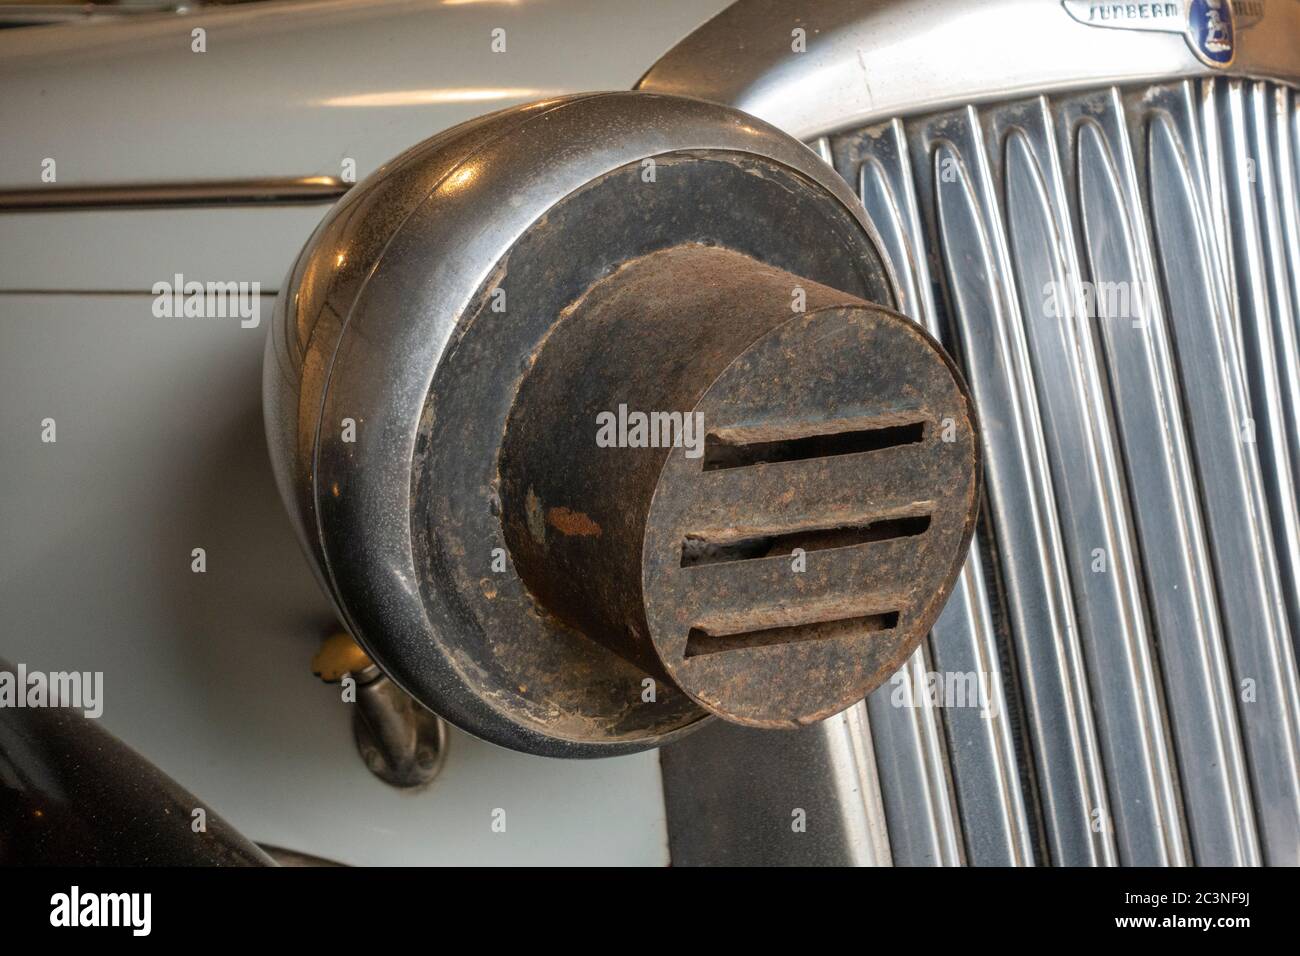 Blackout headlights (replica) fitted to a 1947 Seunbeam Talbot on display in the vehicle garages, Bletchley Park, Bletchley, Buckinghamshire, UK. Stock Photo